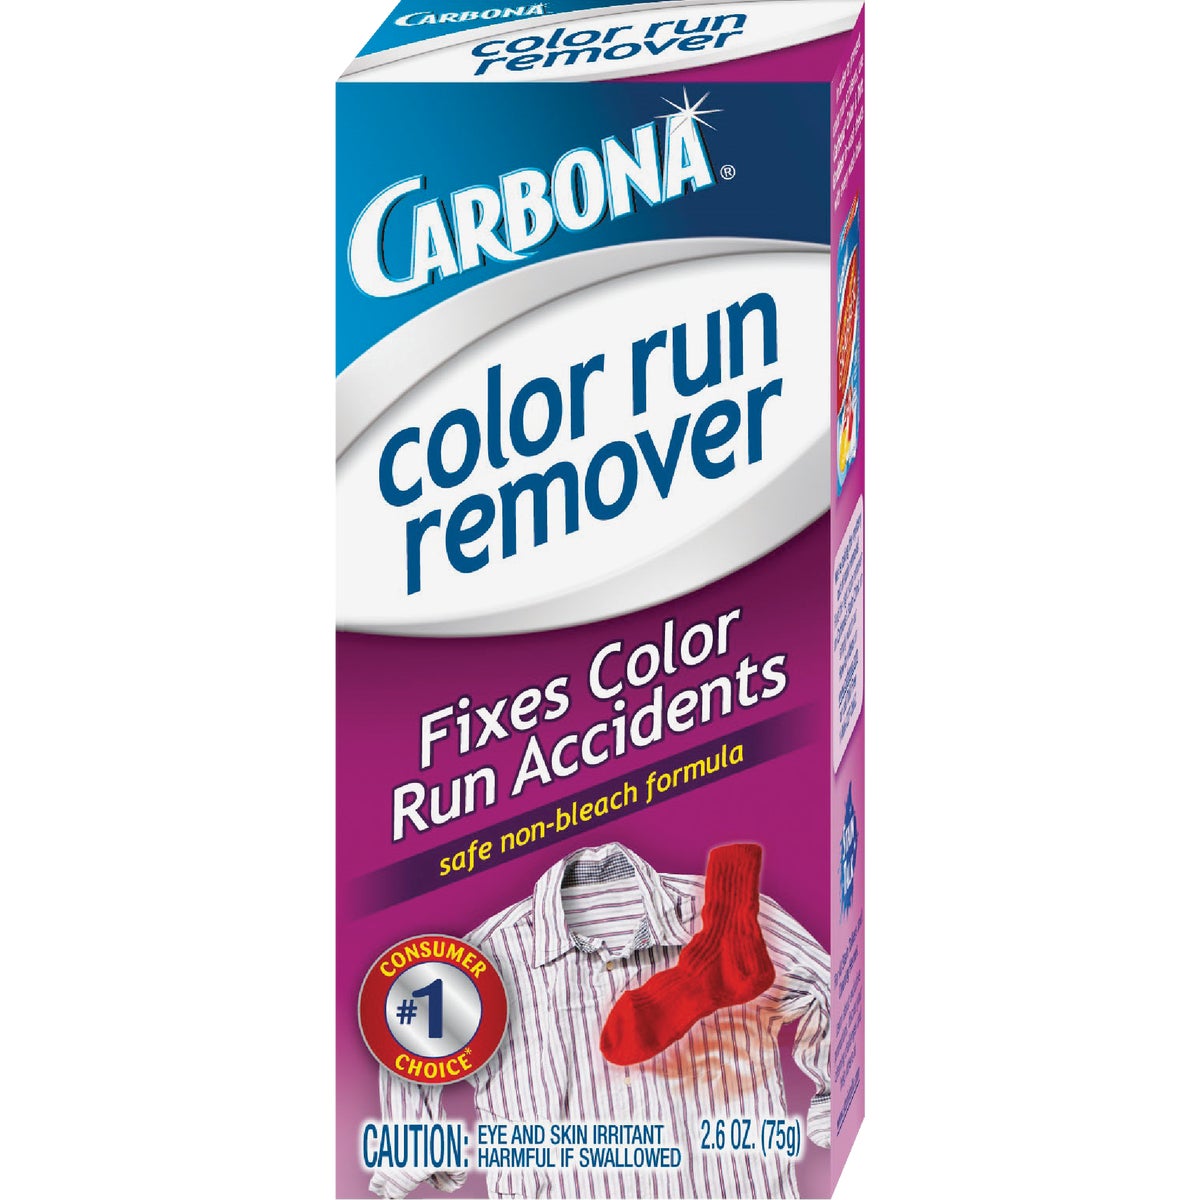 Item 611263, First aid for laundry. Corrects color bleed and mixed load accidents.